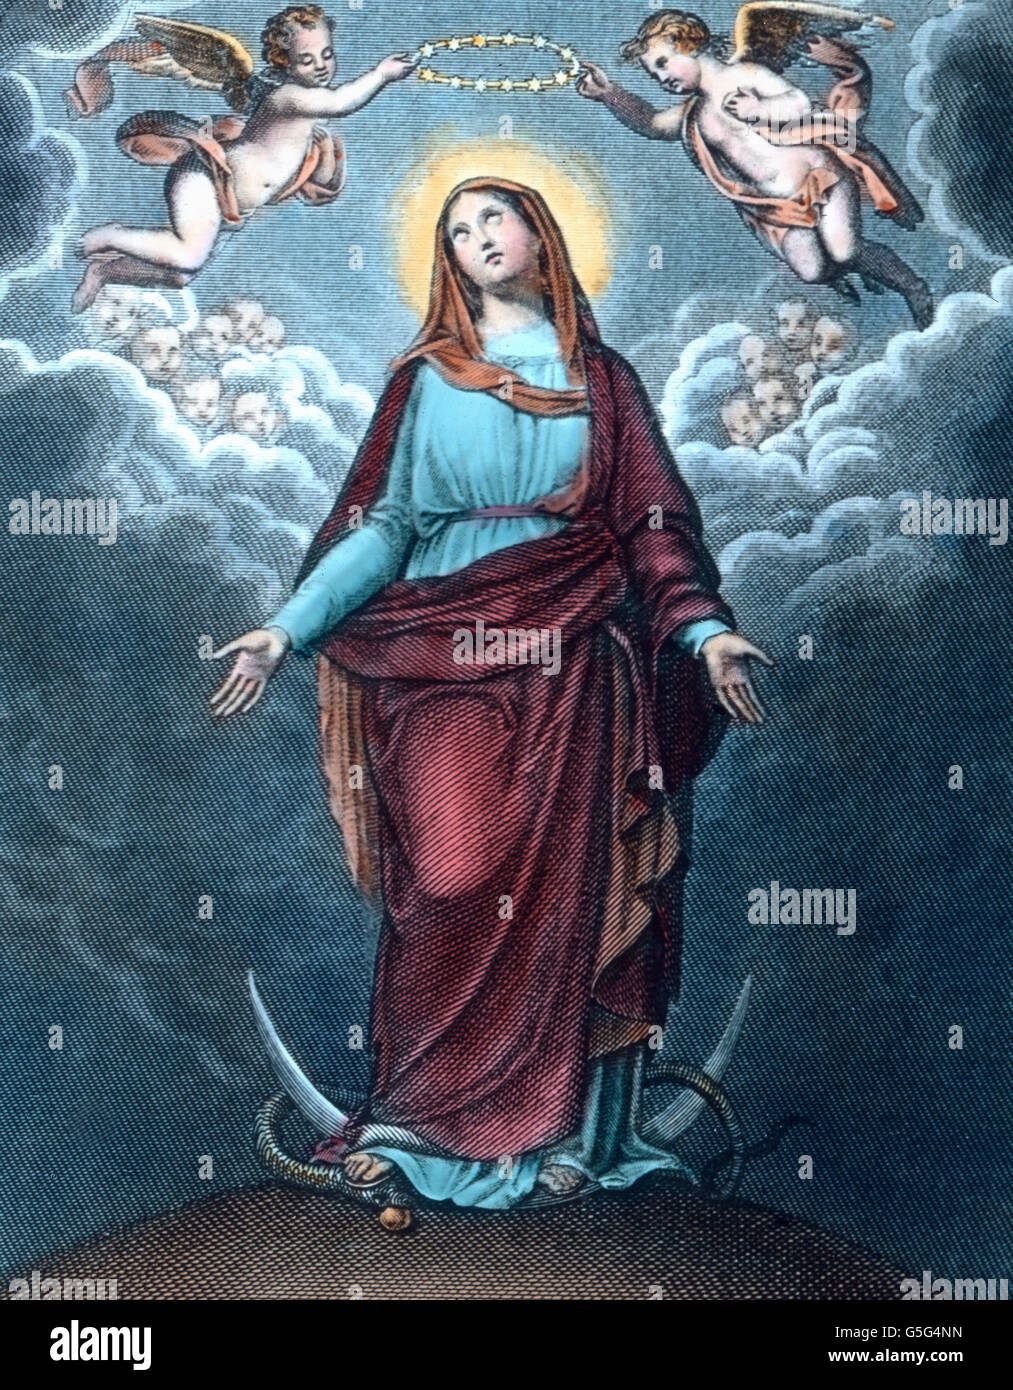 Heilige Maria Mutter Gottes. Holy Virgin Mary. Europe, France, Lourdes, pilgrim, pilgrimage, religion, history, historical, 1910s, 1920s, 20th century, archive, Carl Simon, illustration, virgin, holy, angels, putto, allegory Stock Photo